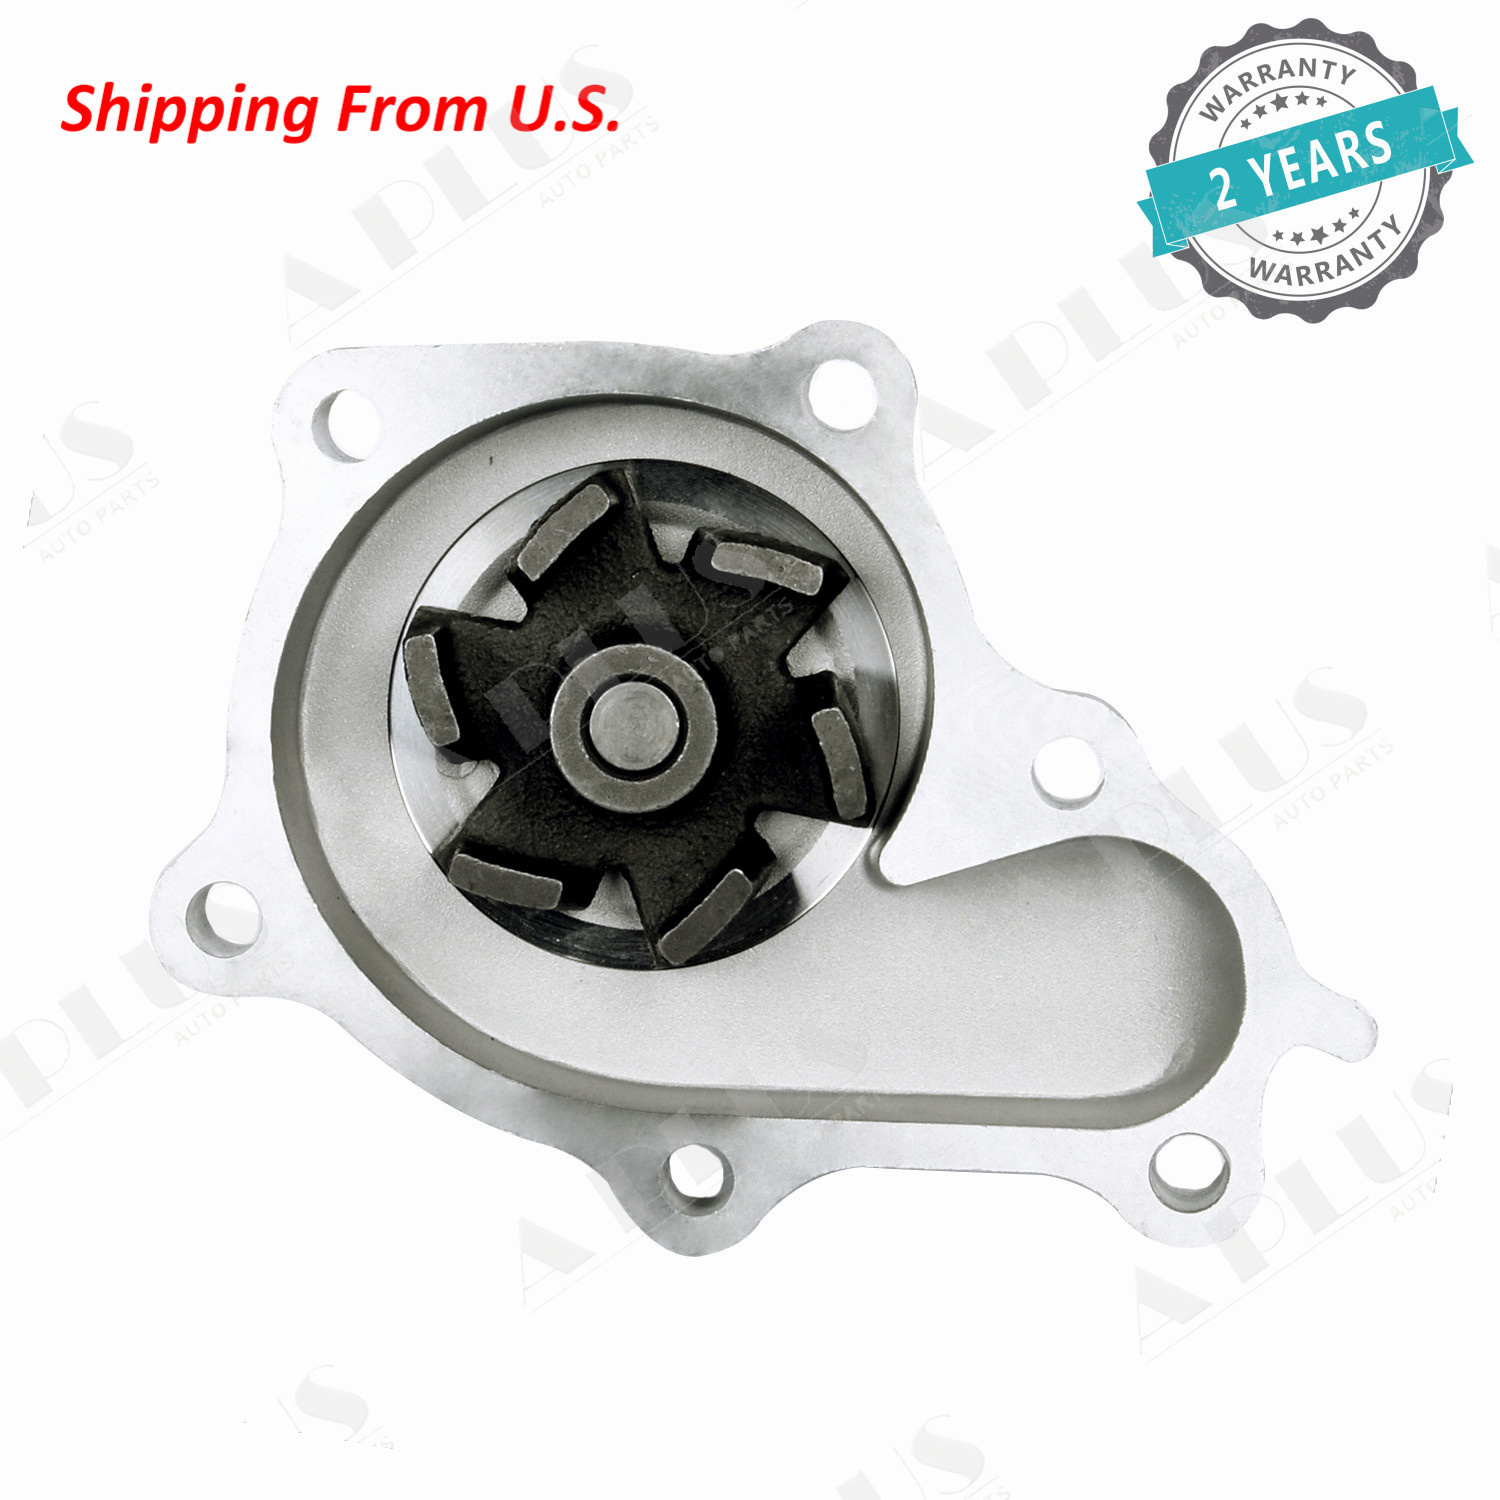 New OAW N2290 Water Pump for Nissan Quest & Mercury Villager 3.3L 99-02